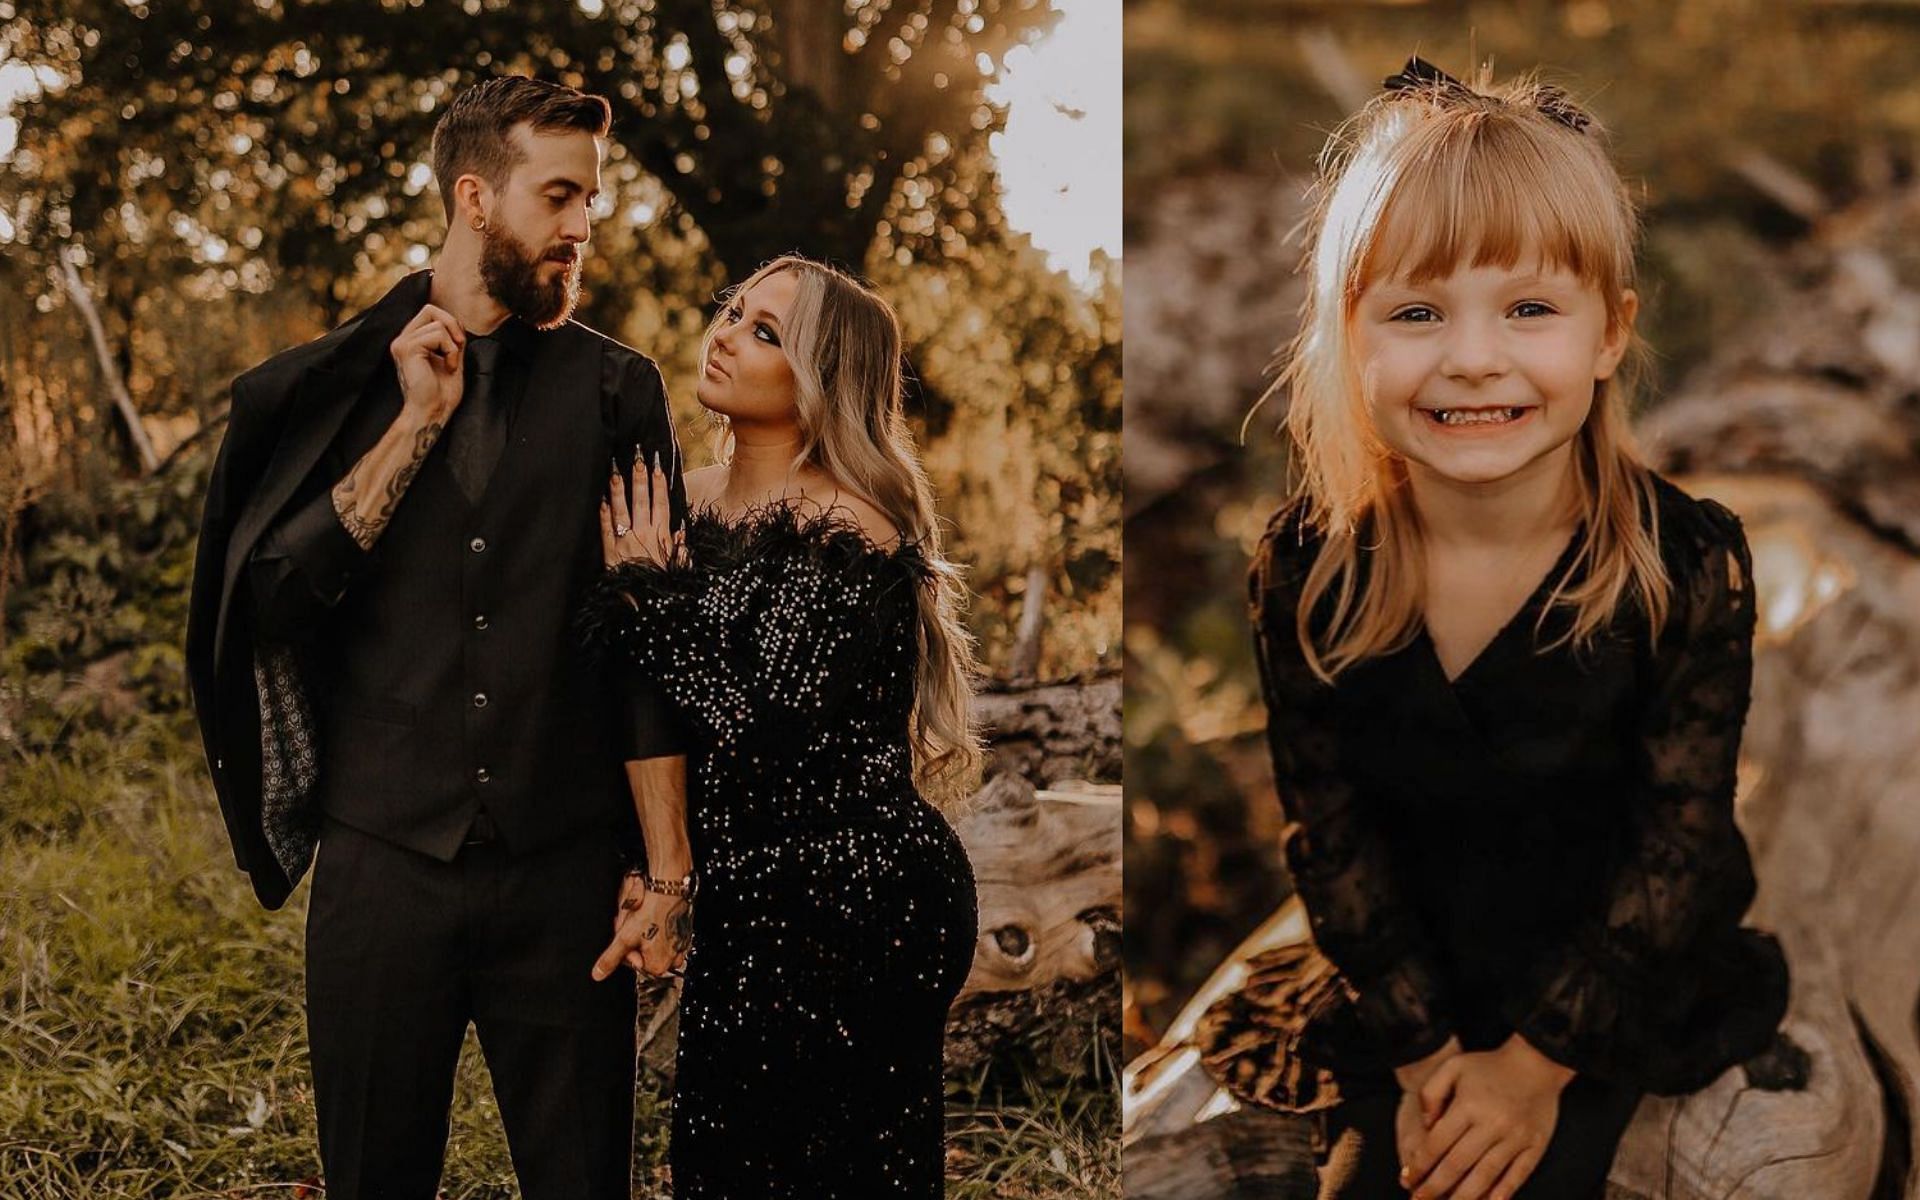 Jade and Sean are planning an October wedding for next year (Images via jadecline_/ Instagram)